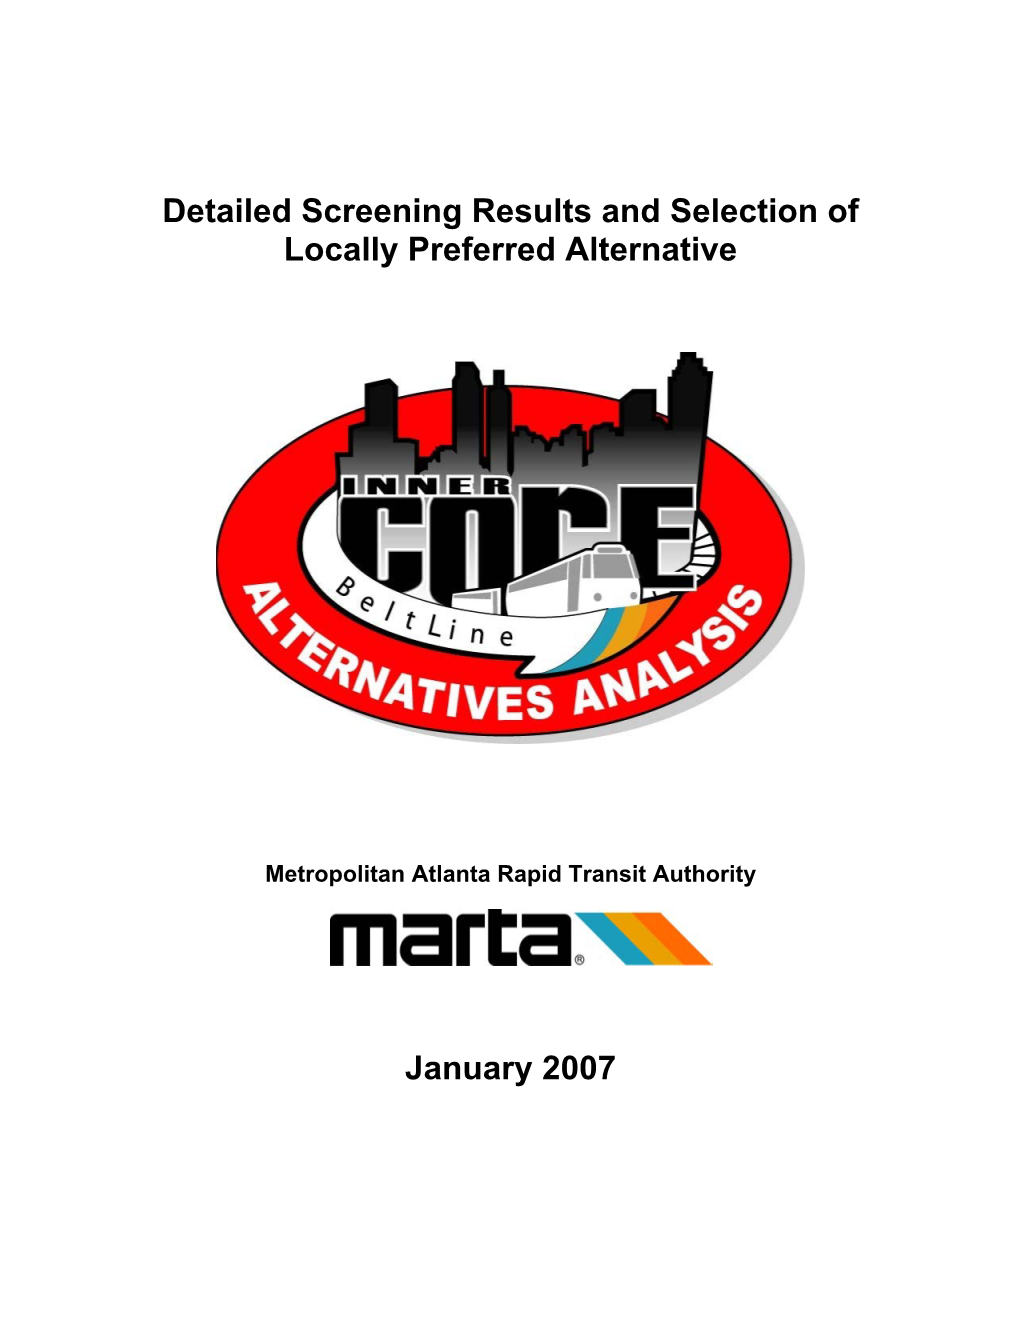 Detailed Screening Results and Selection of Locally Preferred Alternative